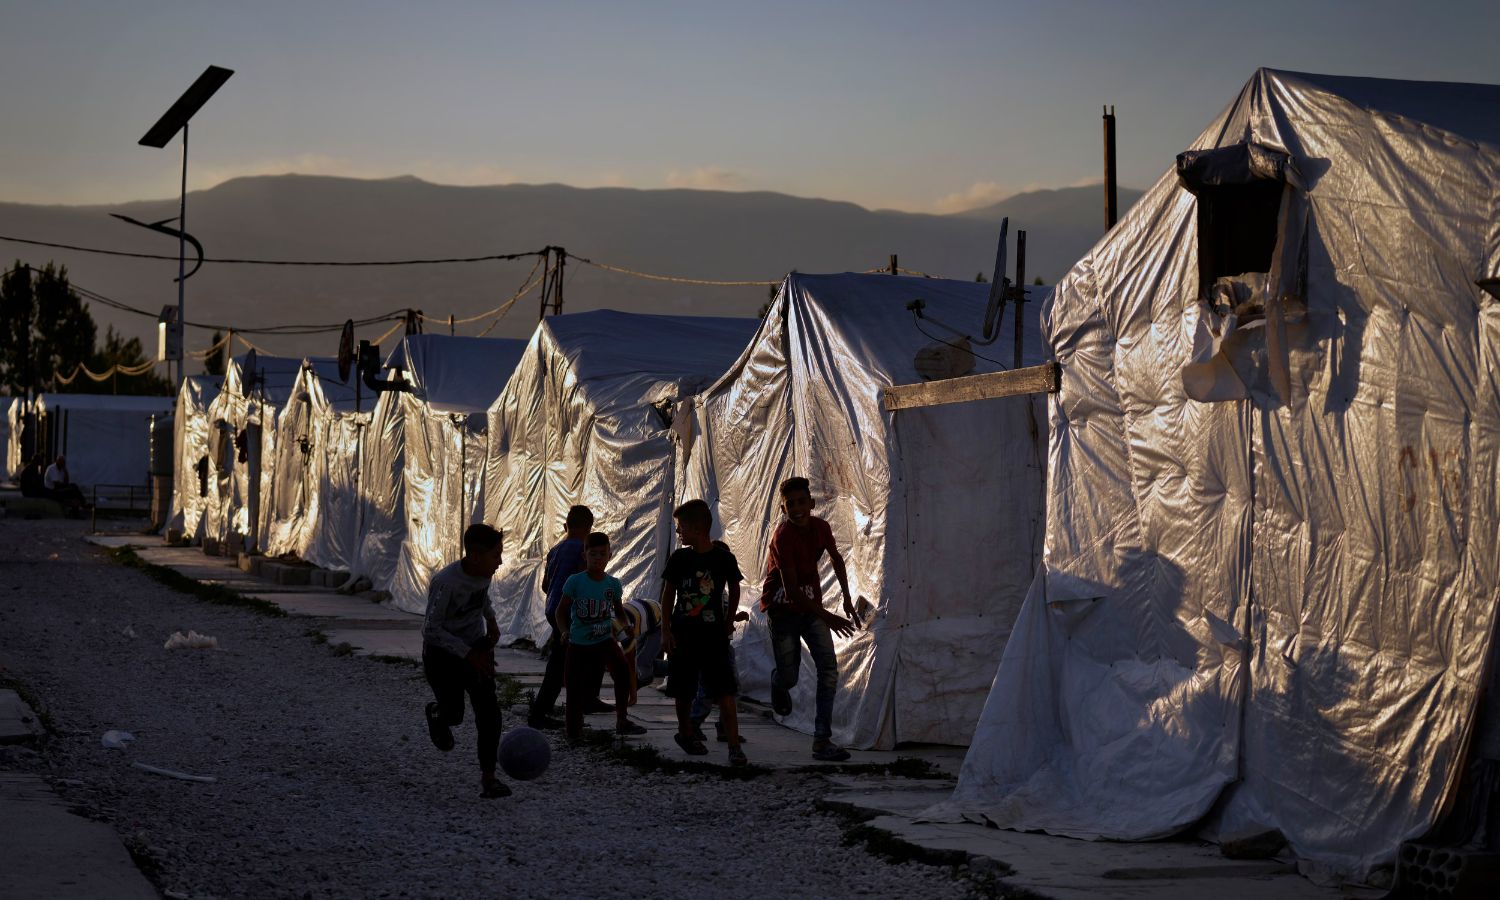 Syrian children play football next to their tents in a refugee camp in the town of Bar Elias in the Bekaa Valley, Lebanon - July 7, 2022 (AP)